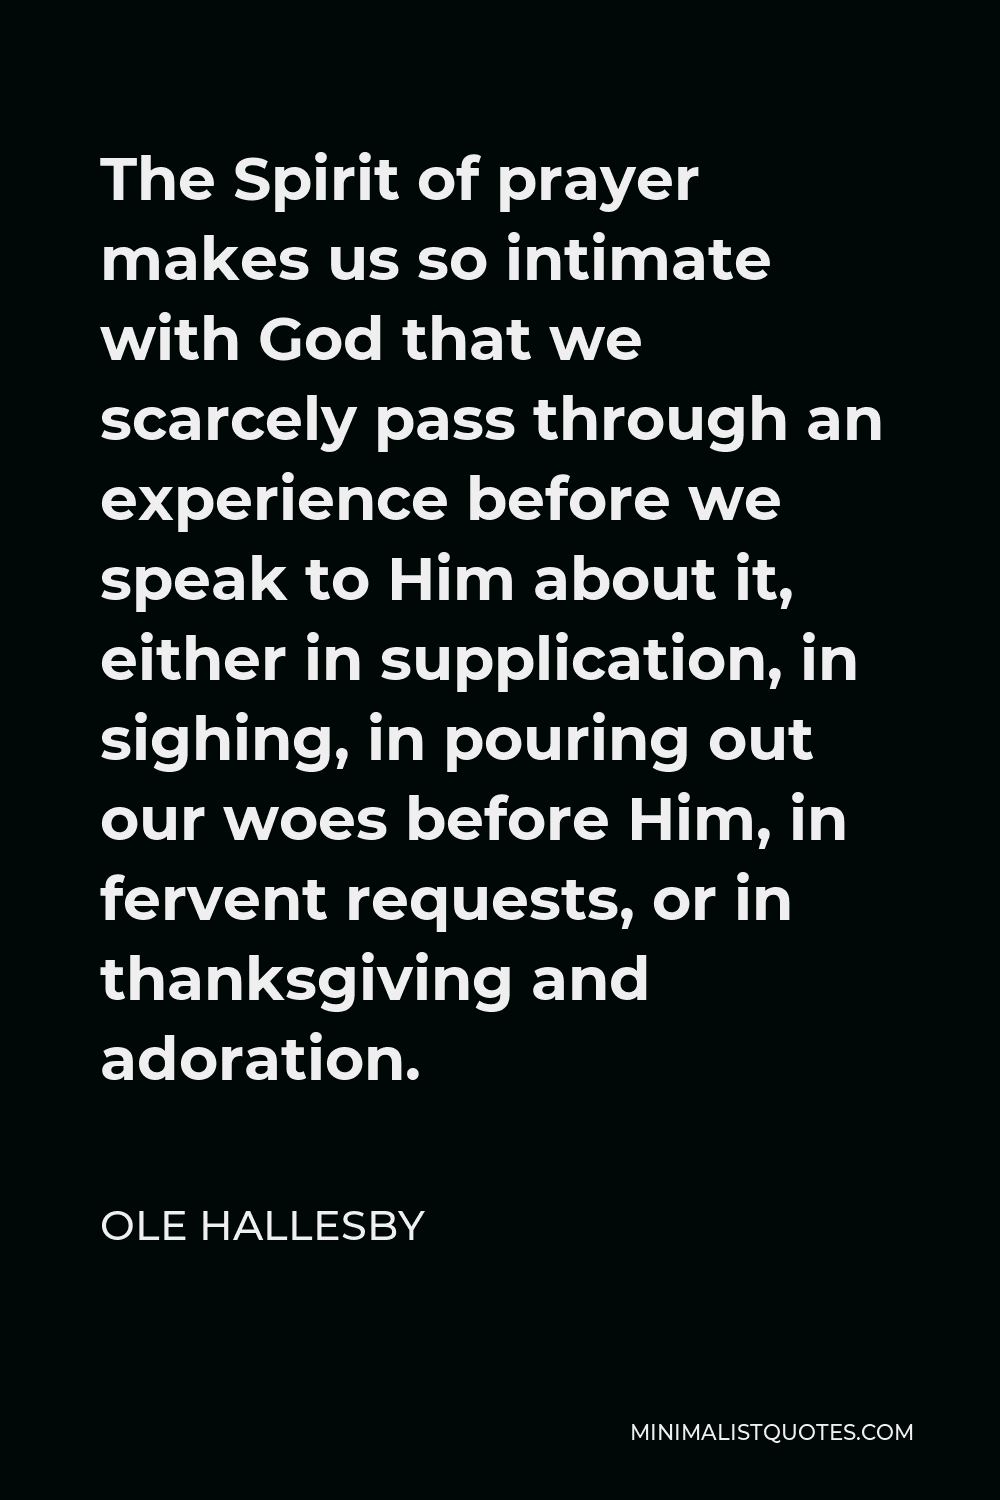 Ole Hallesby Quote - The Spirit of prayer makes us so intimate with God that we scarcely pass through an experience before we speak to Him about it, either in supplication, in sighing, in pouring out our woes before Him, in fervent requests, or in thanksgiving and adoration.